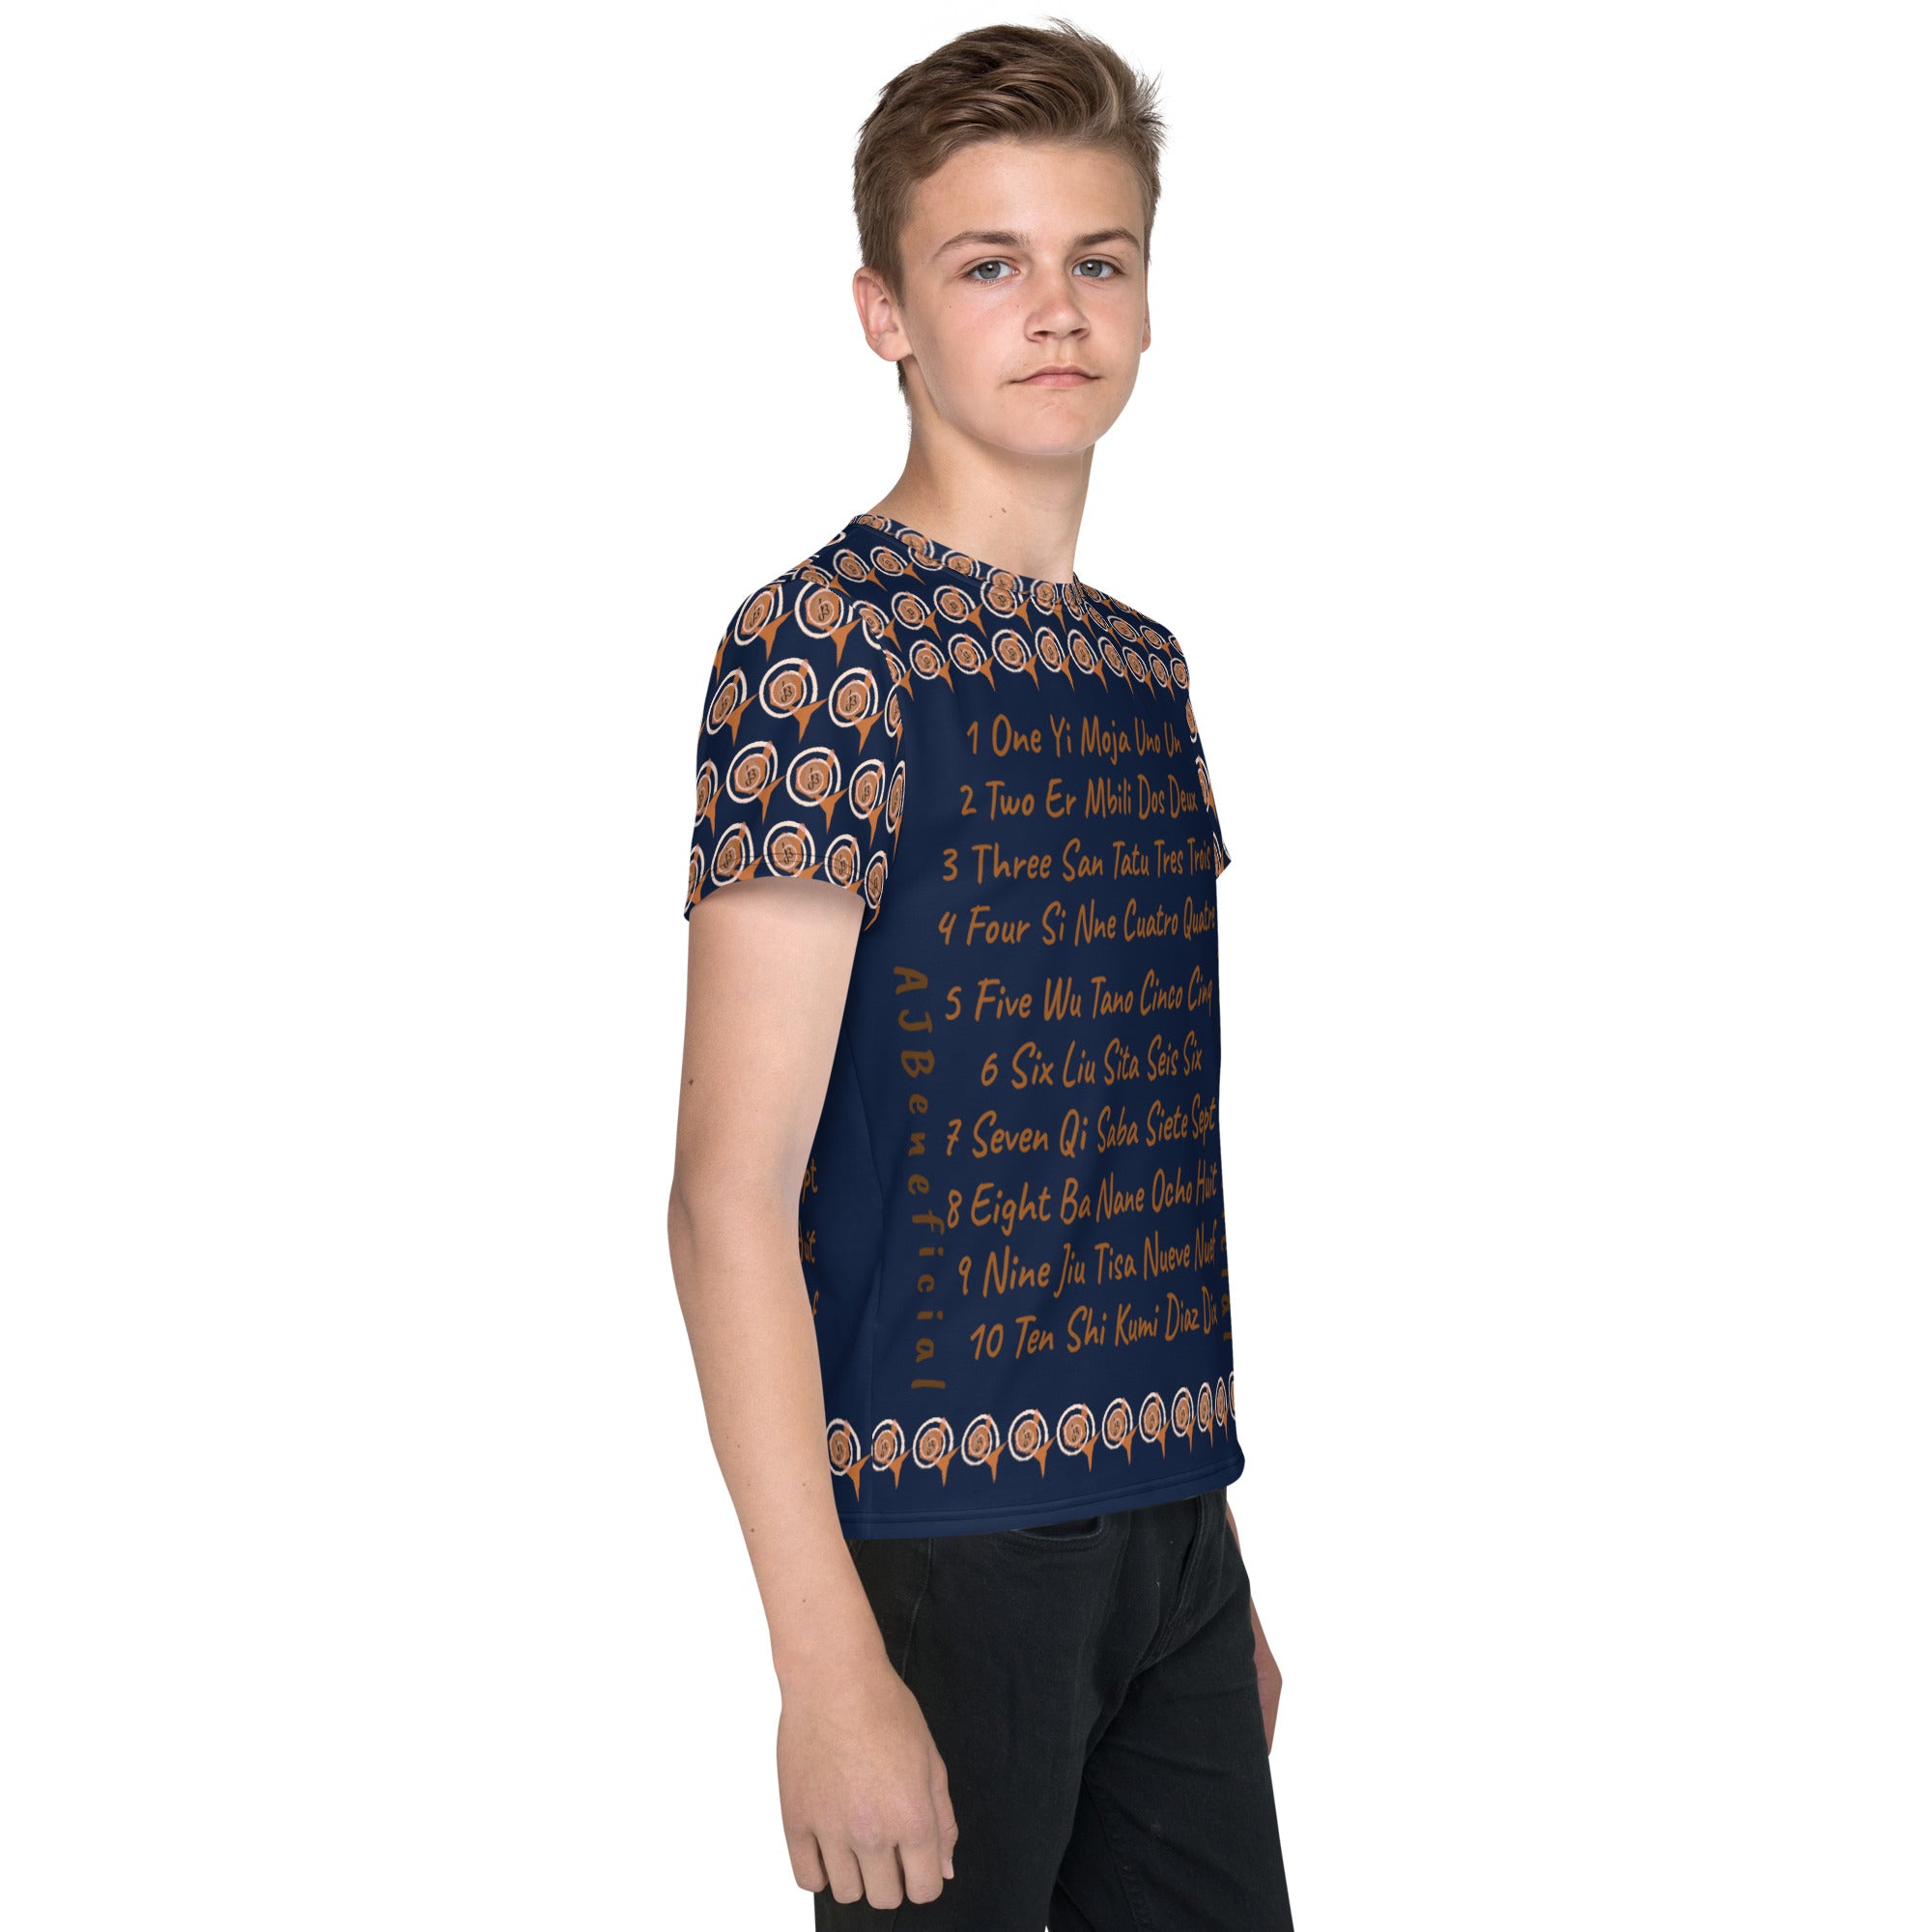 Youth crew neck t-shirt AJBeneficial Whirl in Dark Blue